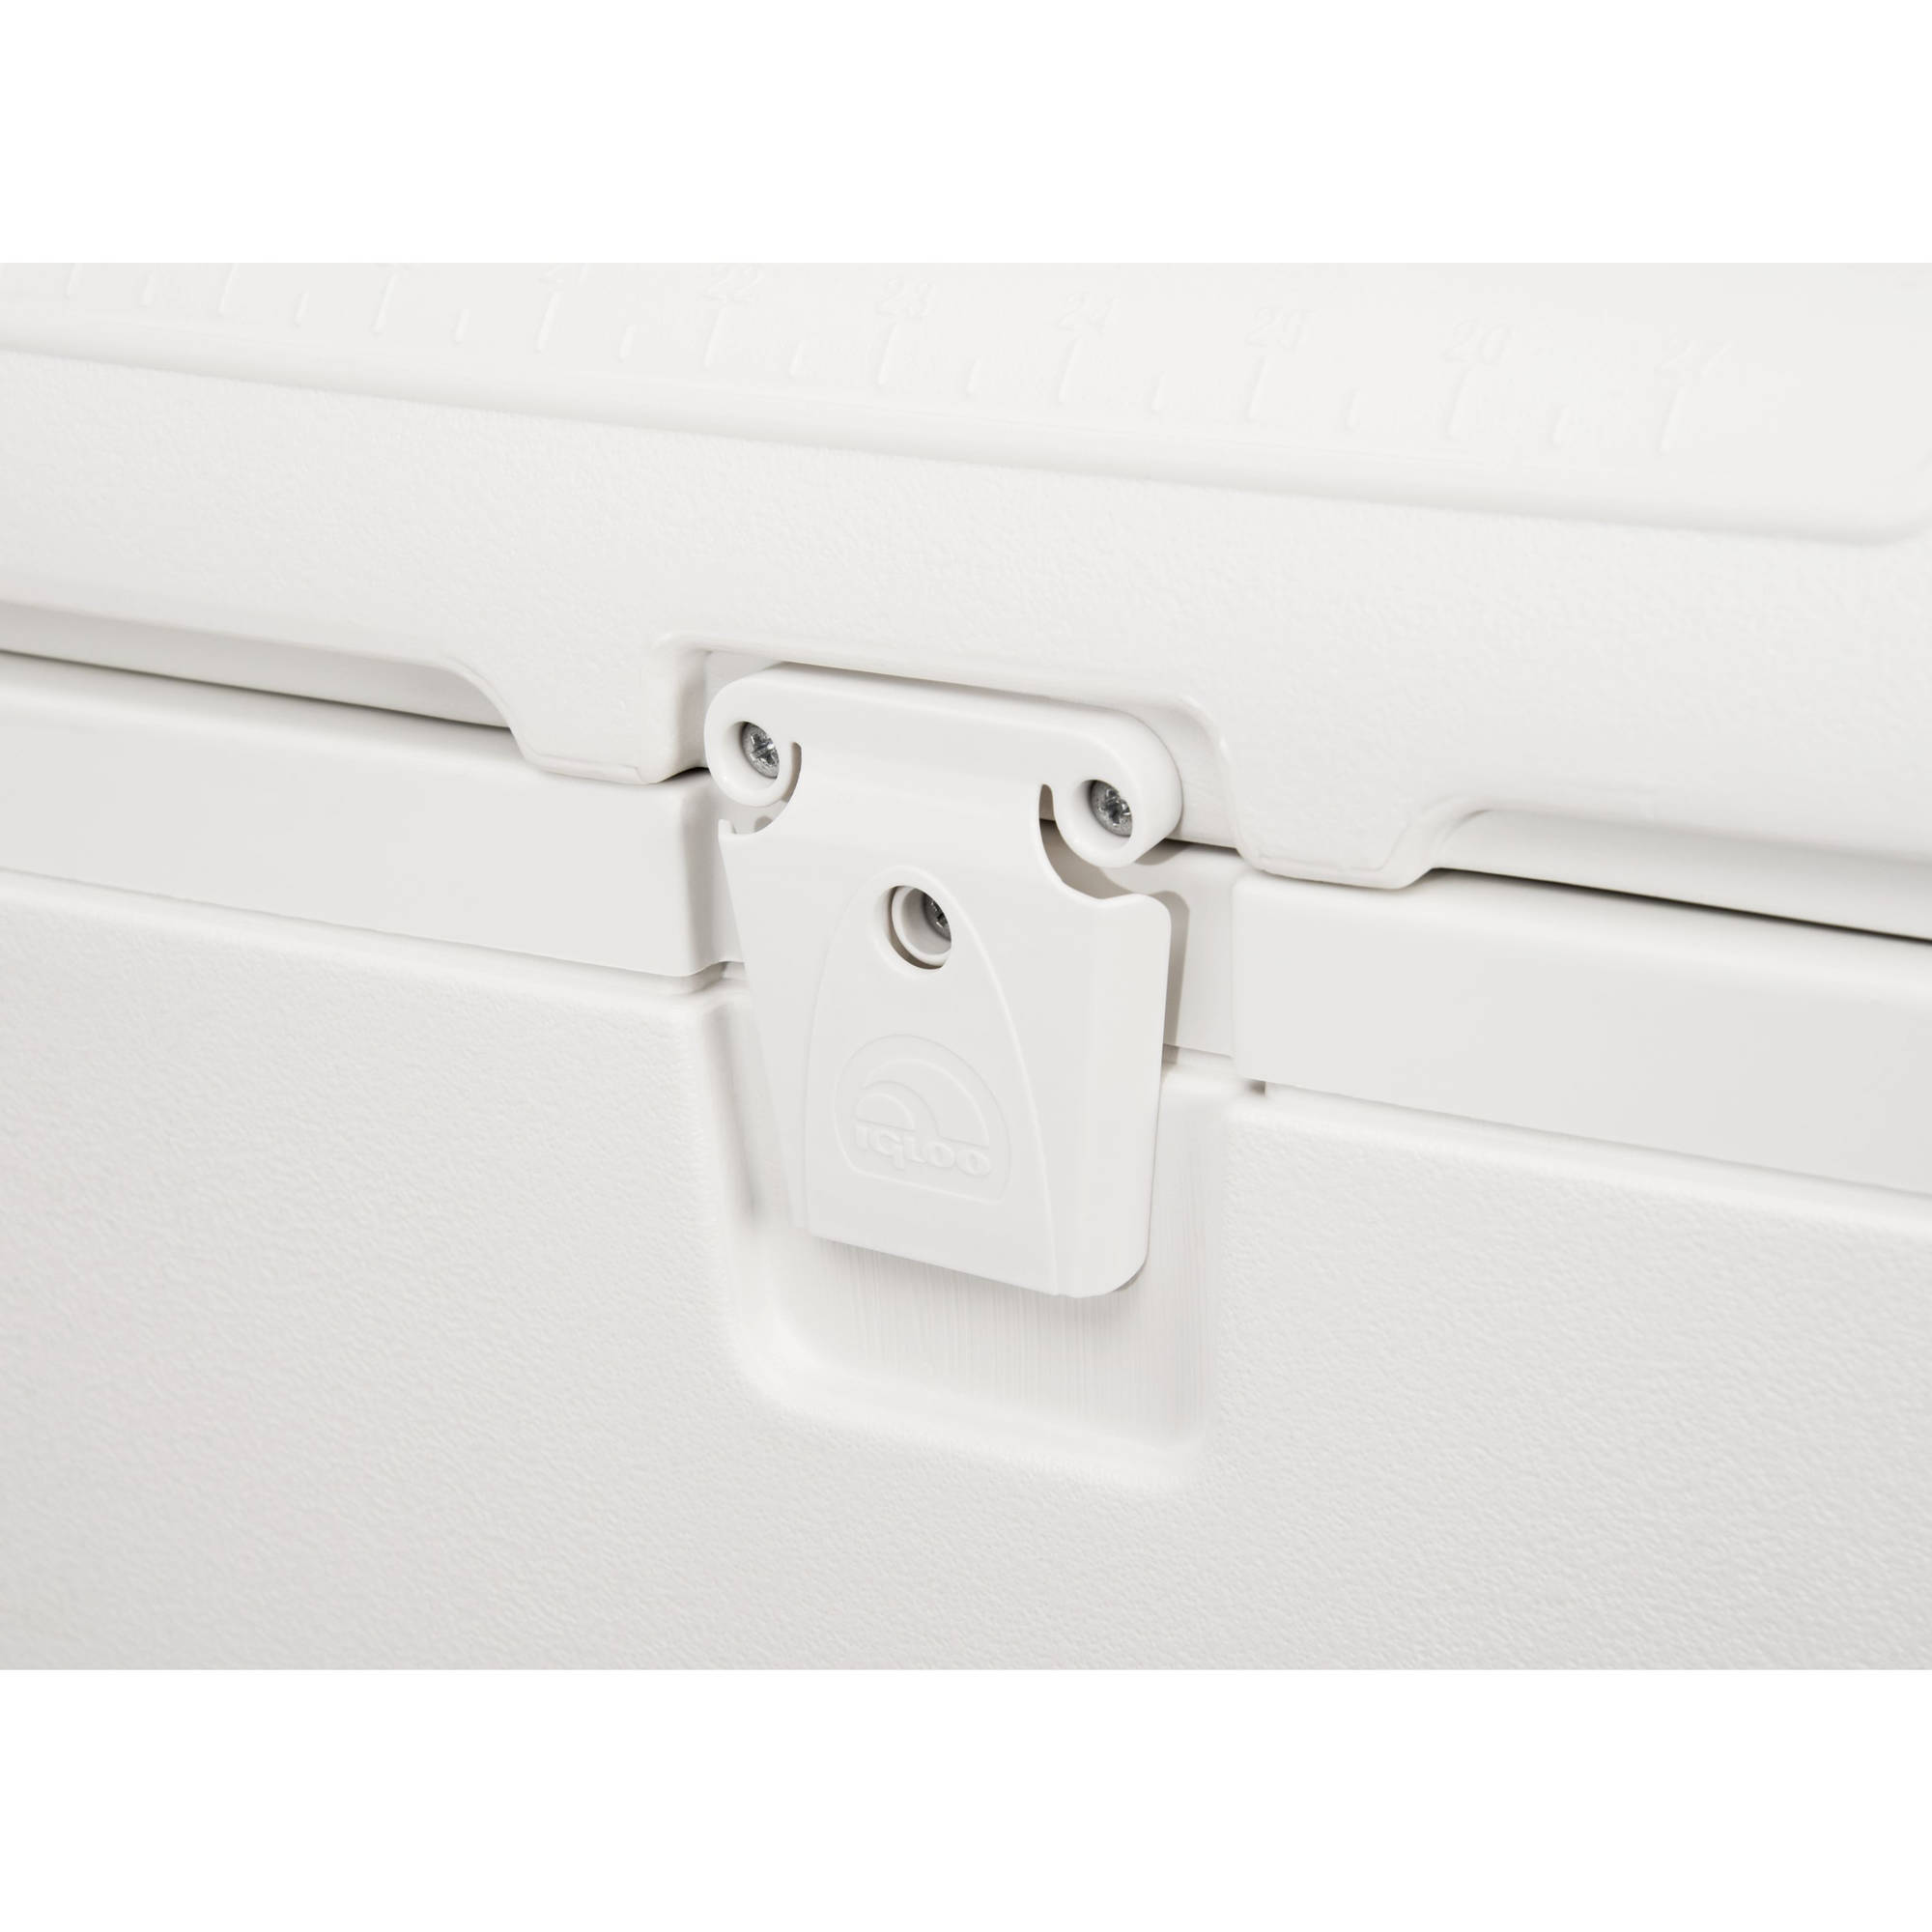 Igloo 120 qt. Quick & Cool Polar Ice Chest Cooler, White - image 8 of 18